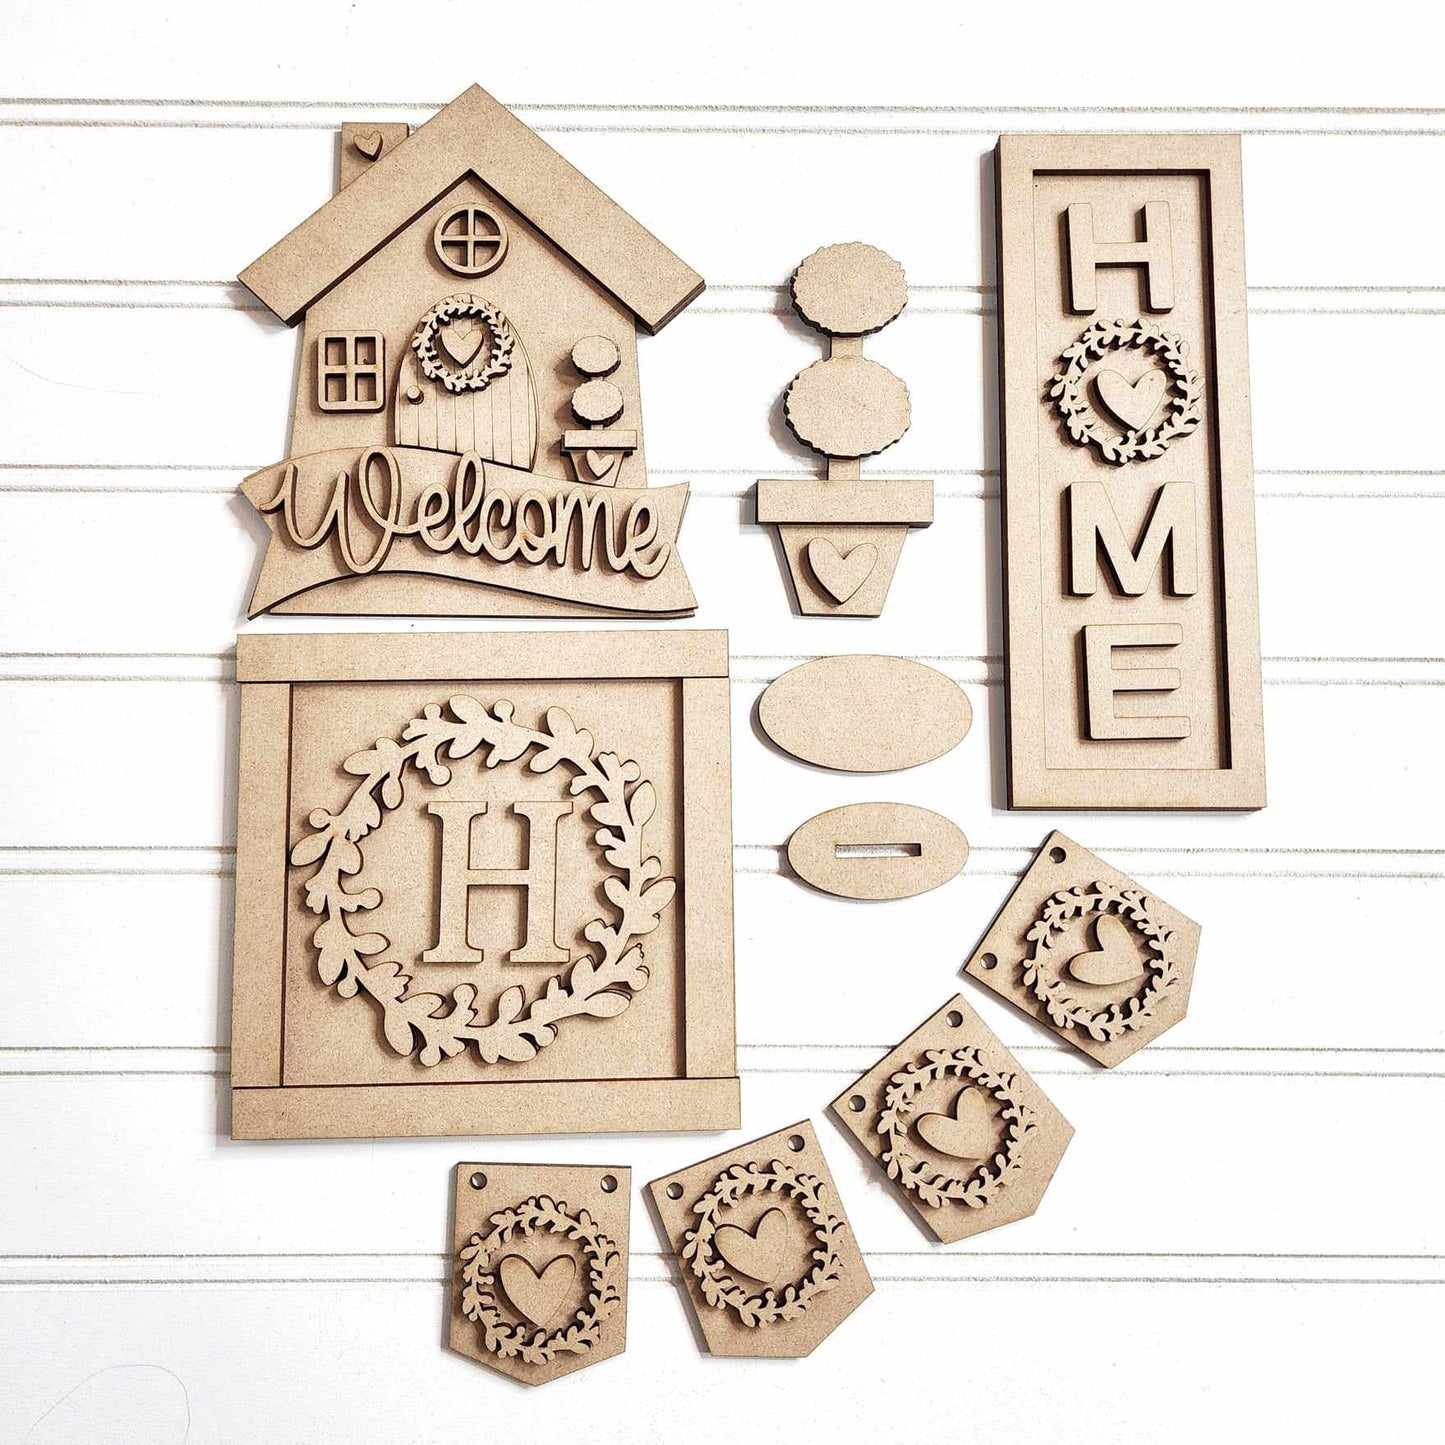 Welcome Home tiered tray set cutouts - unpainted wooden cutouts, ready for you to paint